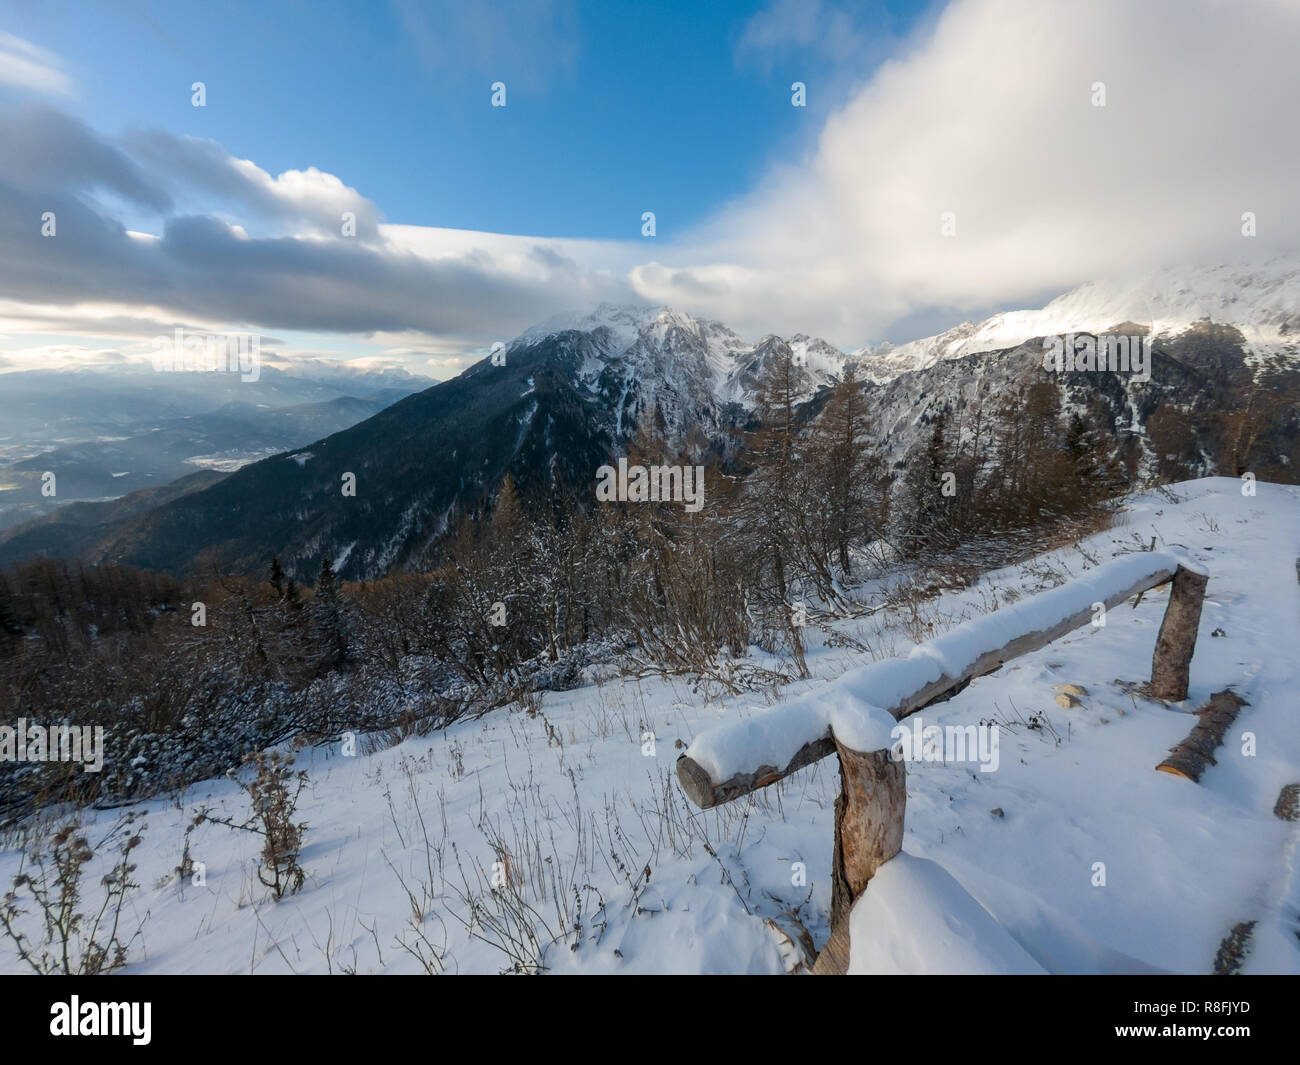 Winter landscape with first snow freshly fallen just covering the scene. Roblek at Begunjscica, Slovenia. Stock Photo